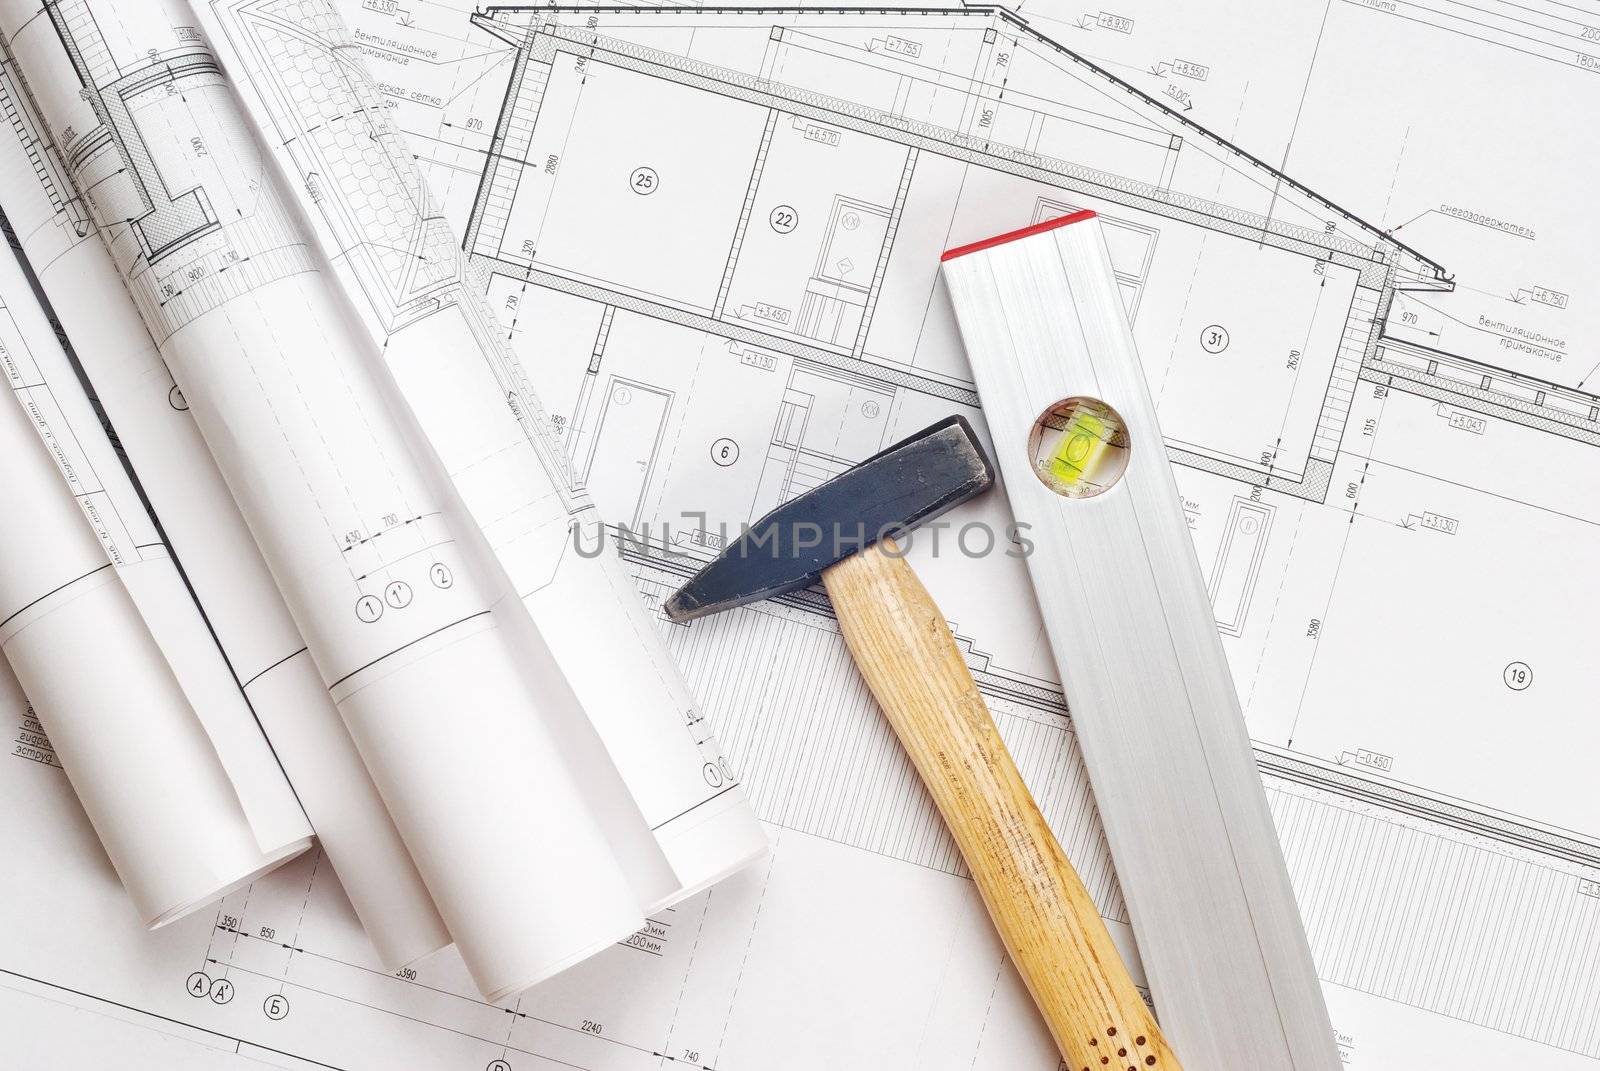 Tools over house plan blueprints